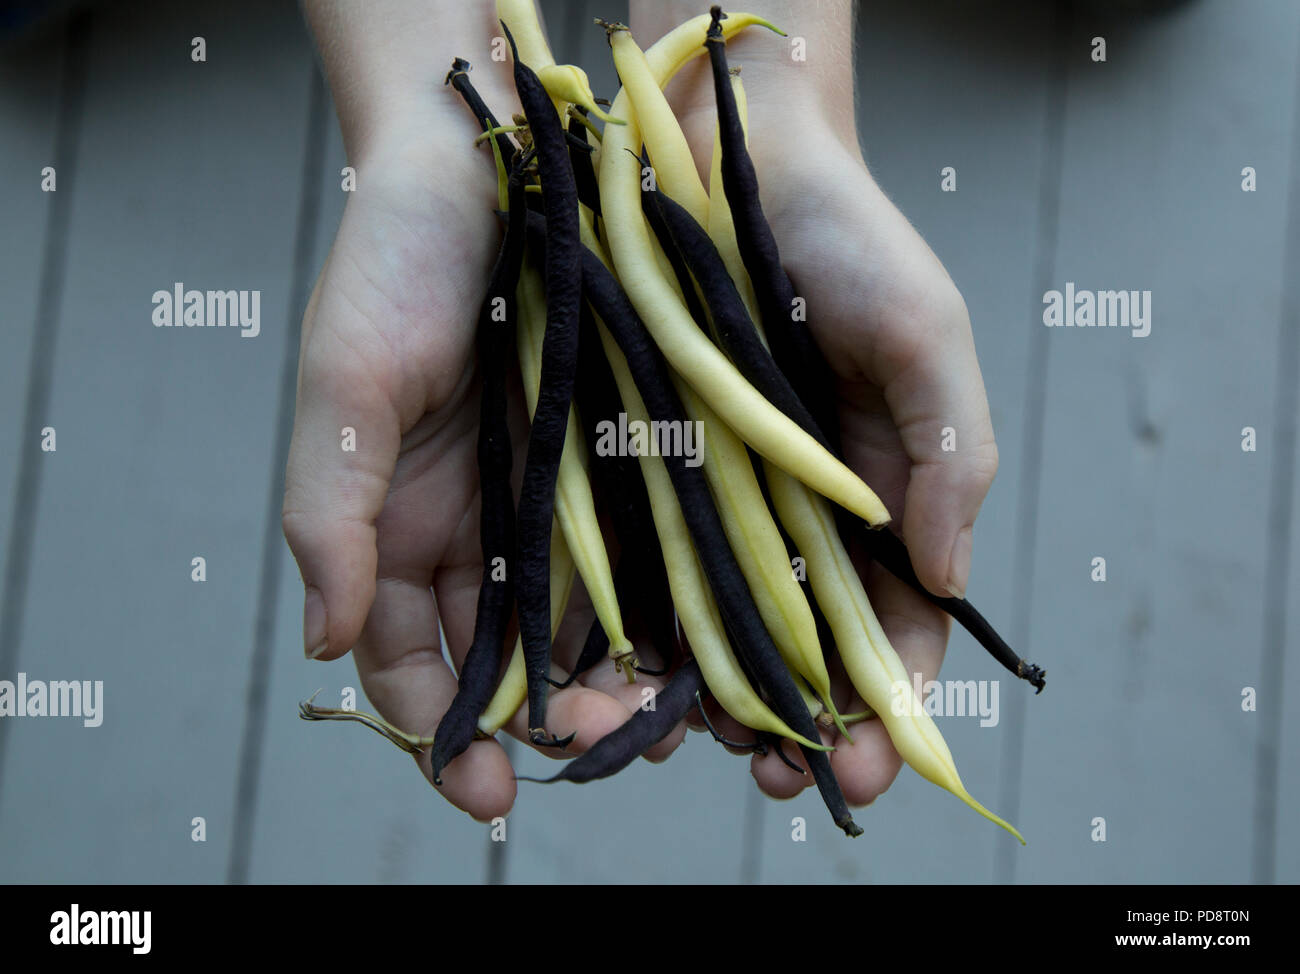 hands holding yellow and purple beans grown in a home garden Stock Photo